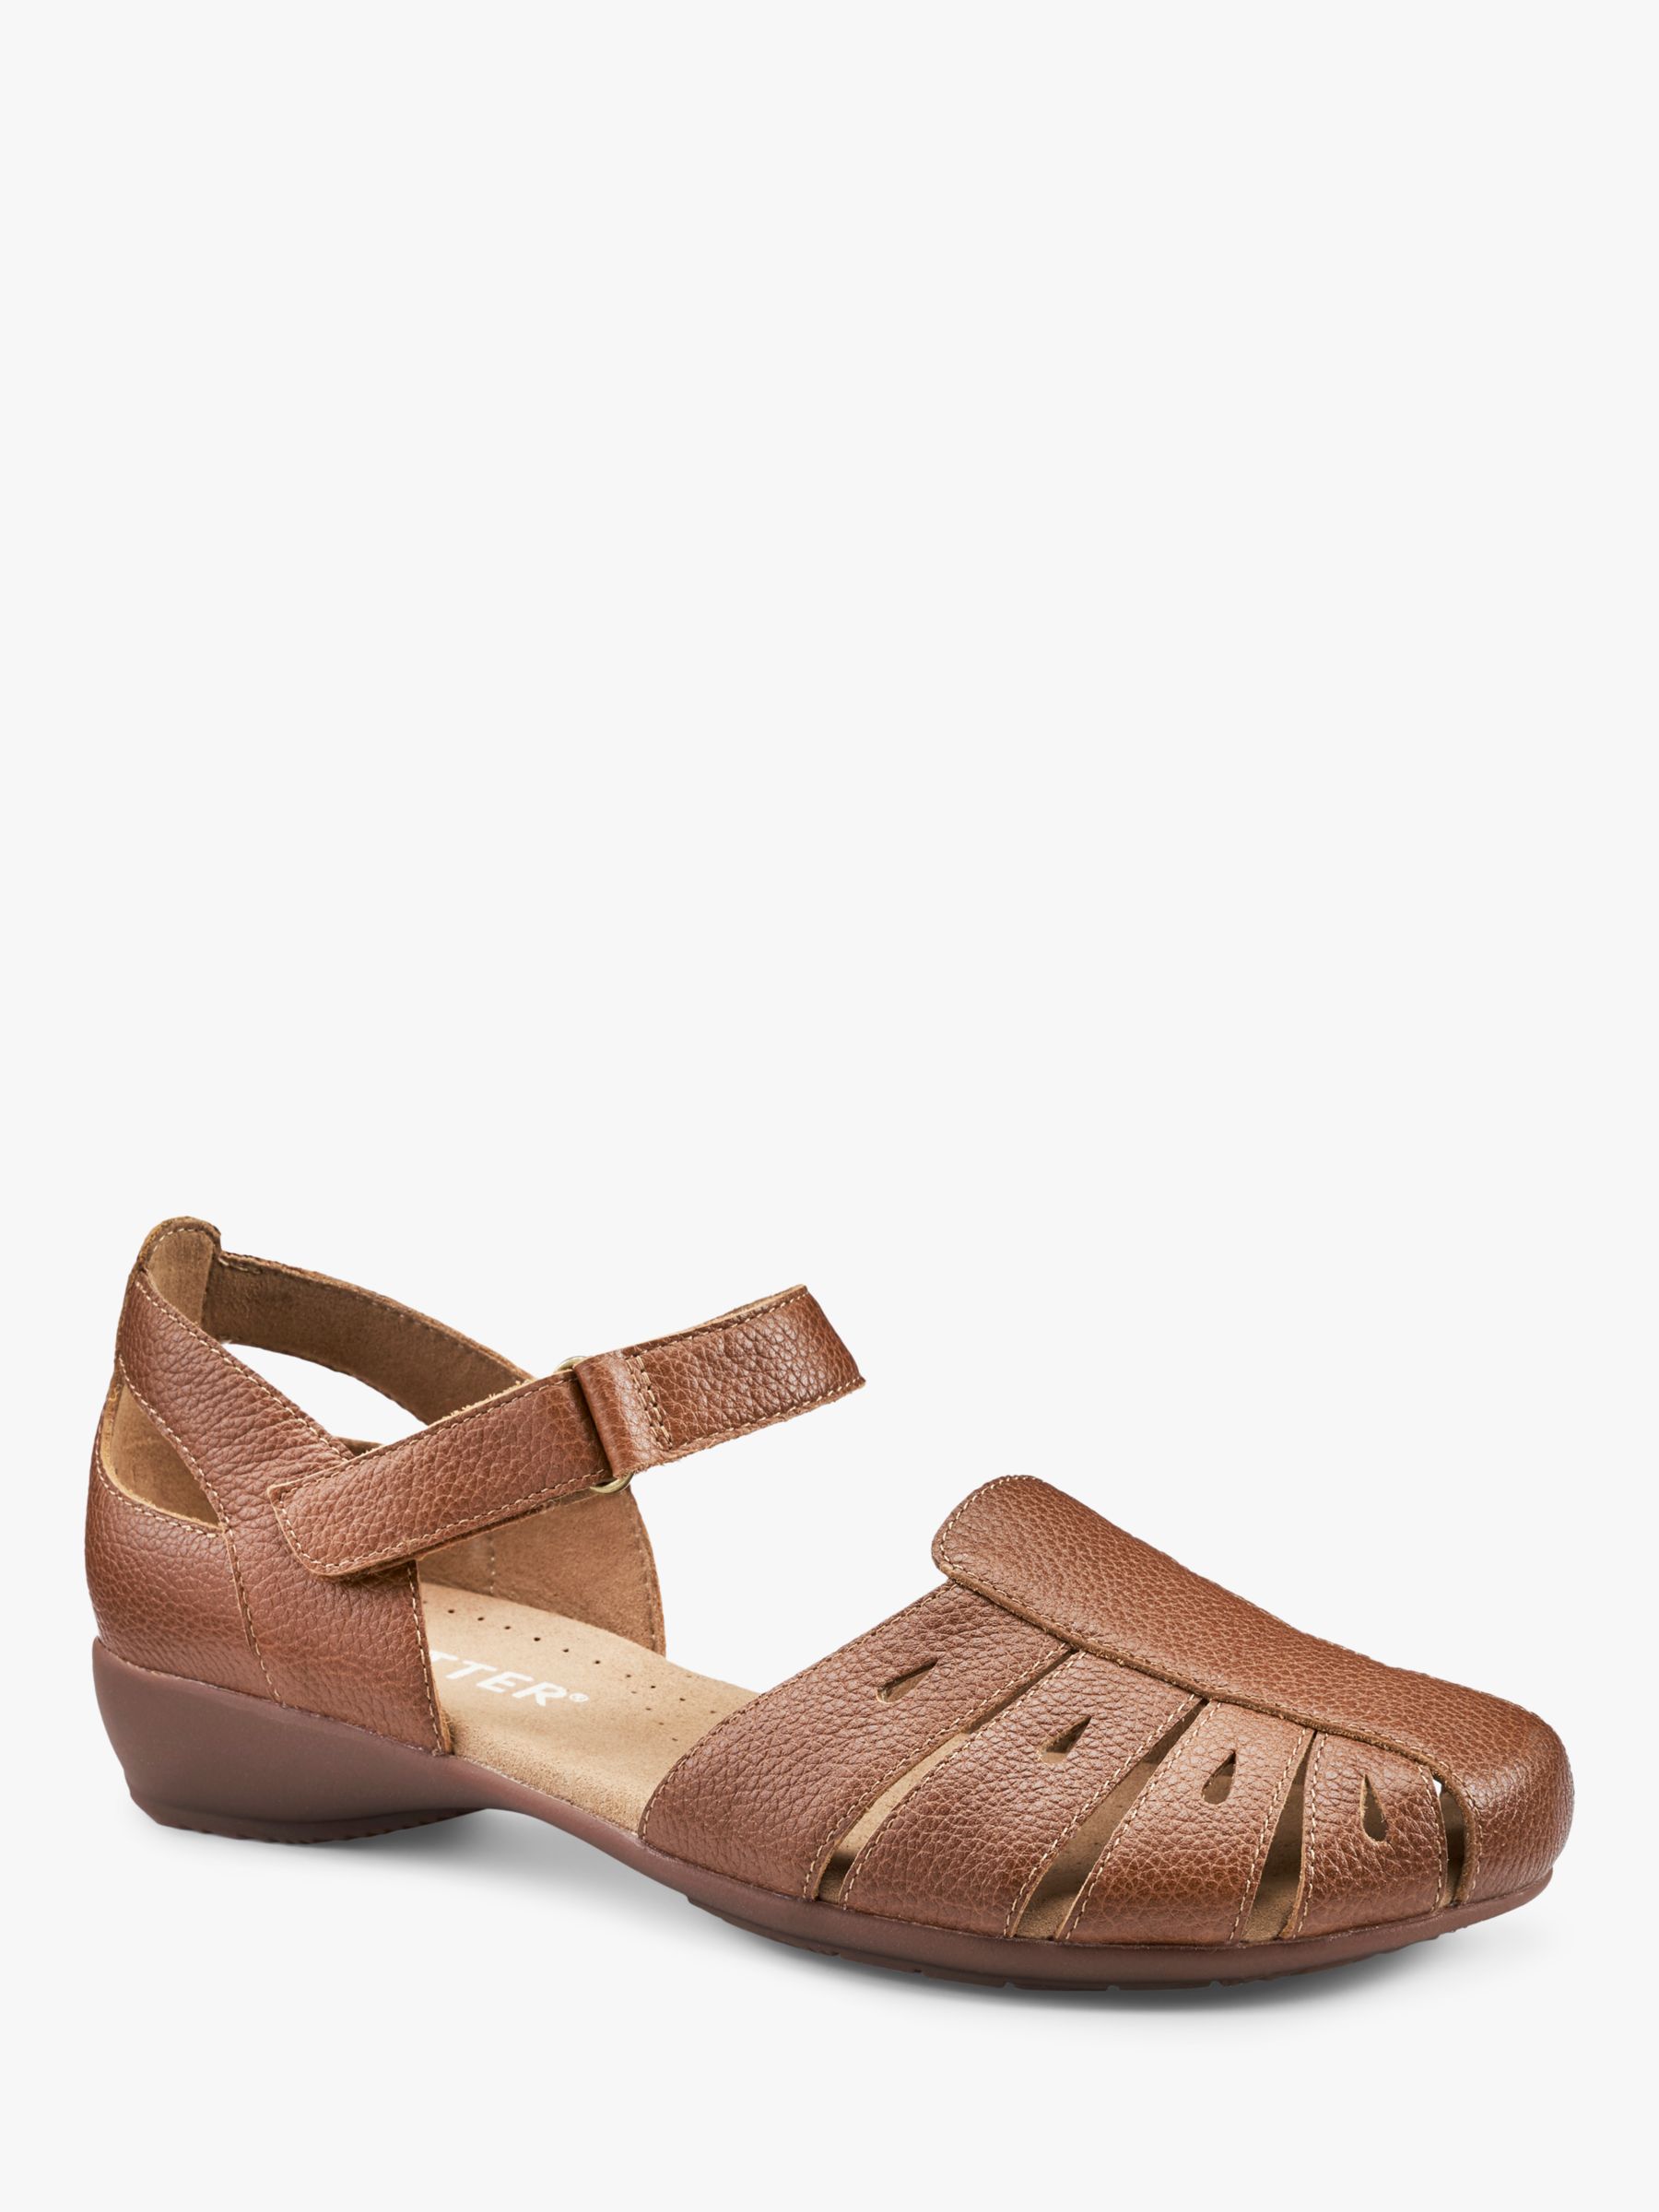 Buy Hotter May Wide Fit Fisherman Style Sandals, Tan Online at johnlewis.com